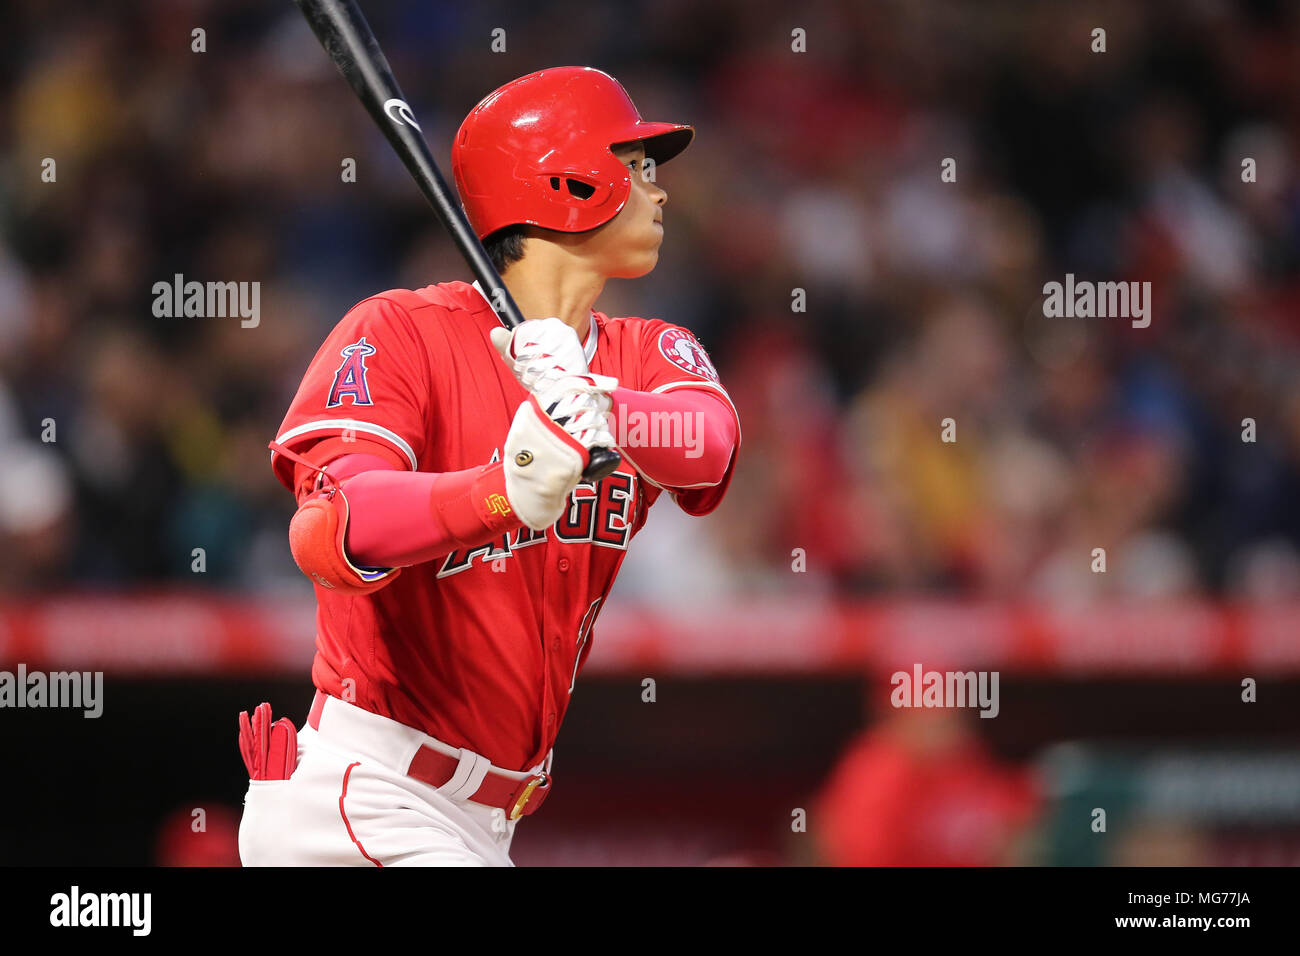 April 27, 2018: Los Angeles Angels starting pitcher Shohei Ohtani (17) watches his homer to right field in the game between the New York Yankees and Los Angeles Angels of Anaheim, Angel Stadium in Anaheim, CA, Photographer: Peter Joneleit Stock Photo